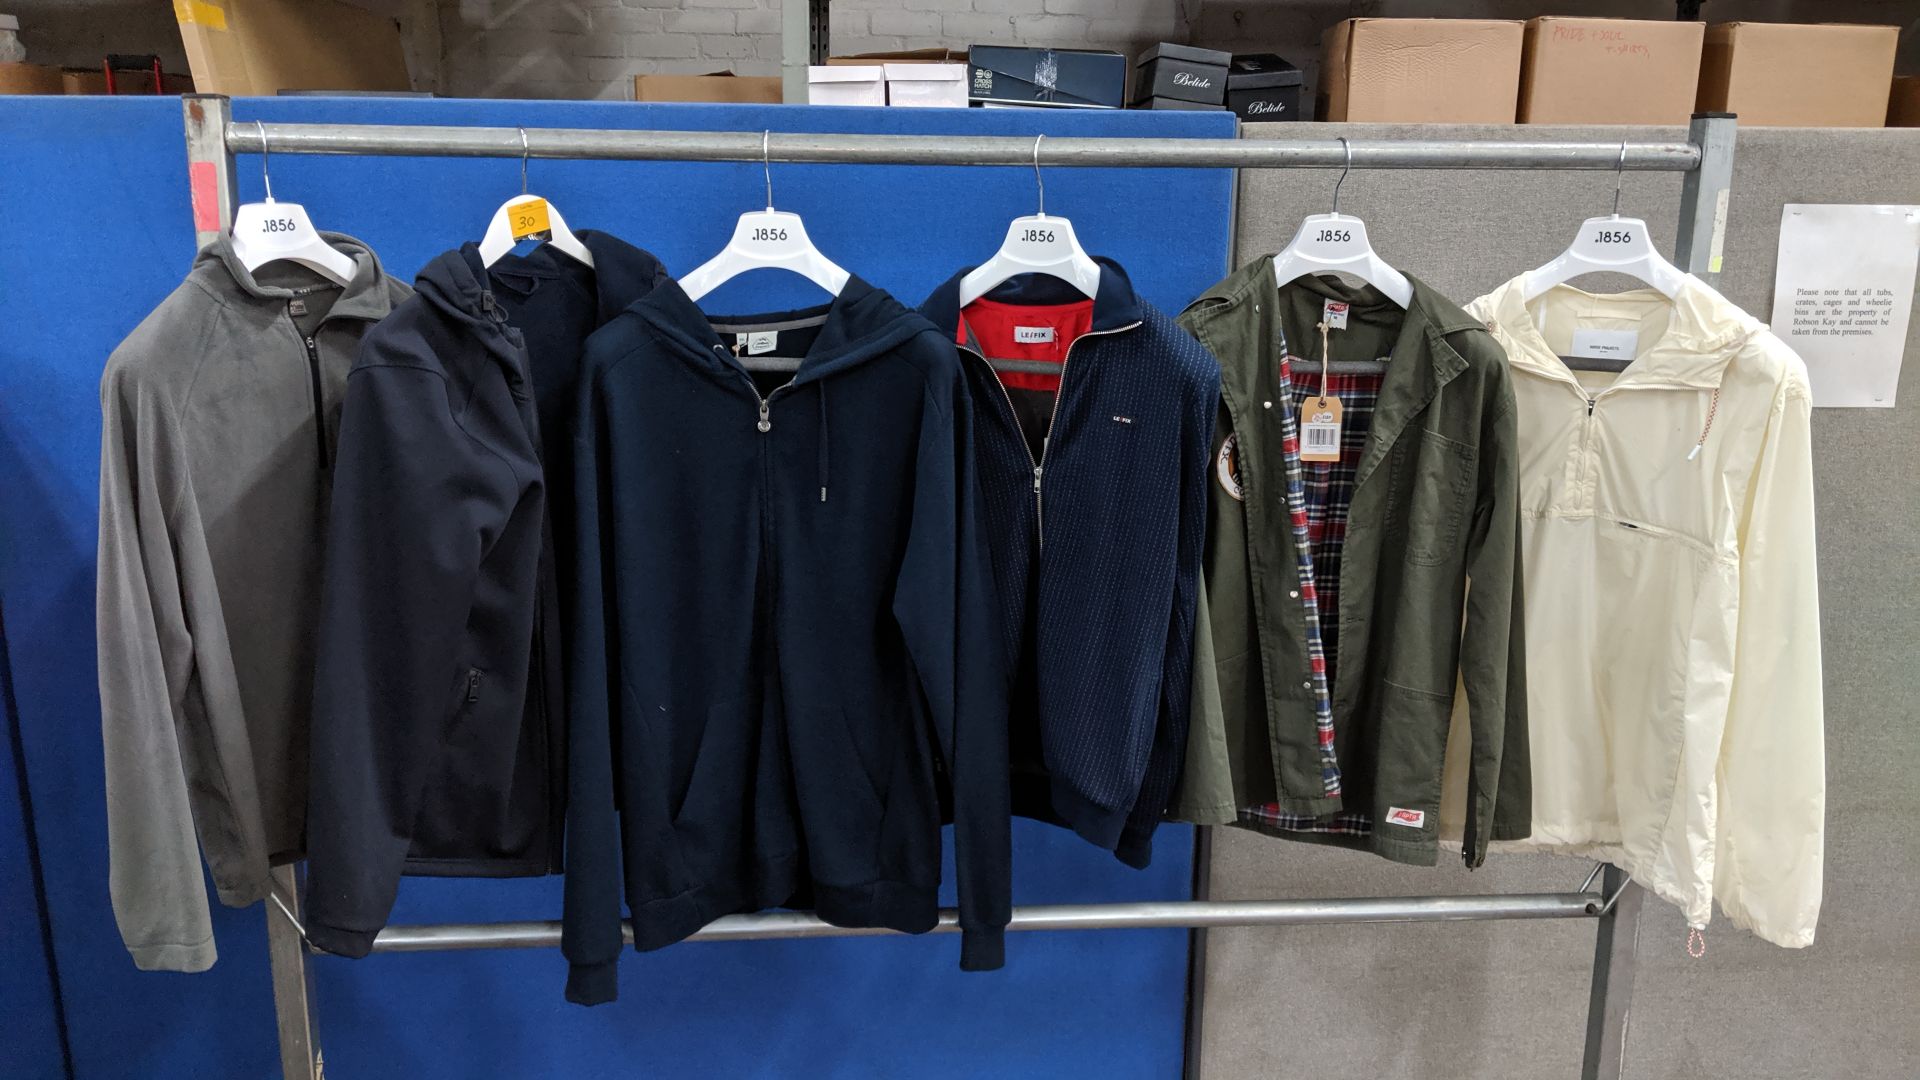 6 off assorted full zip & half zip tops by Pyrenex, Craghoppers, Le Fix, Norse Projects & others. - Image 2 of 6